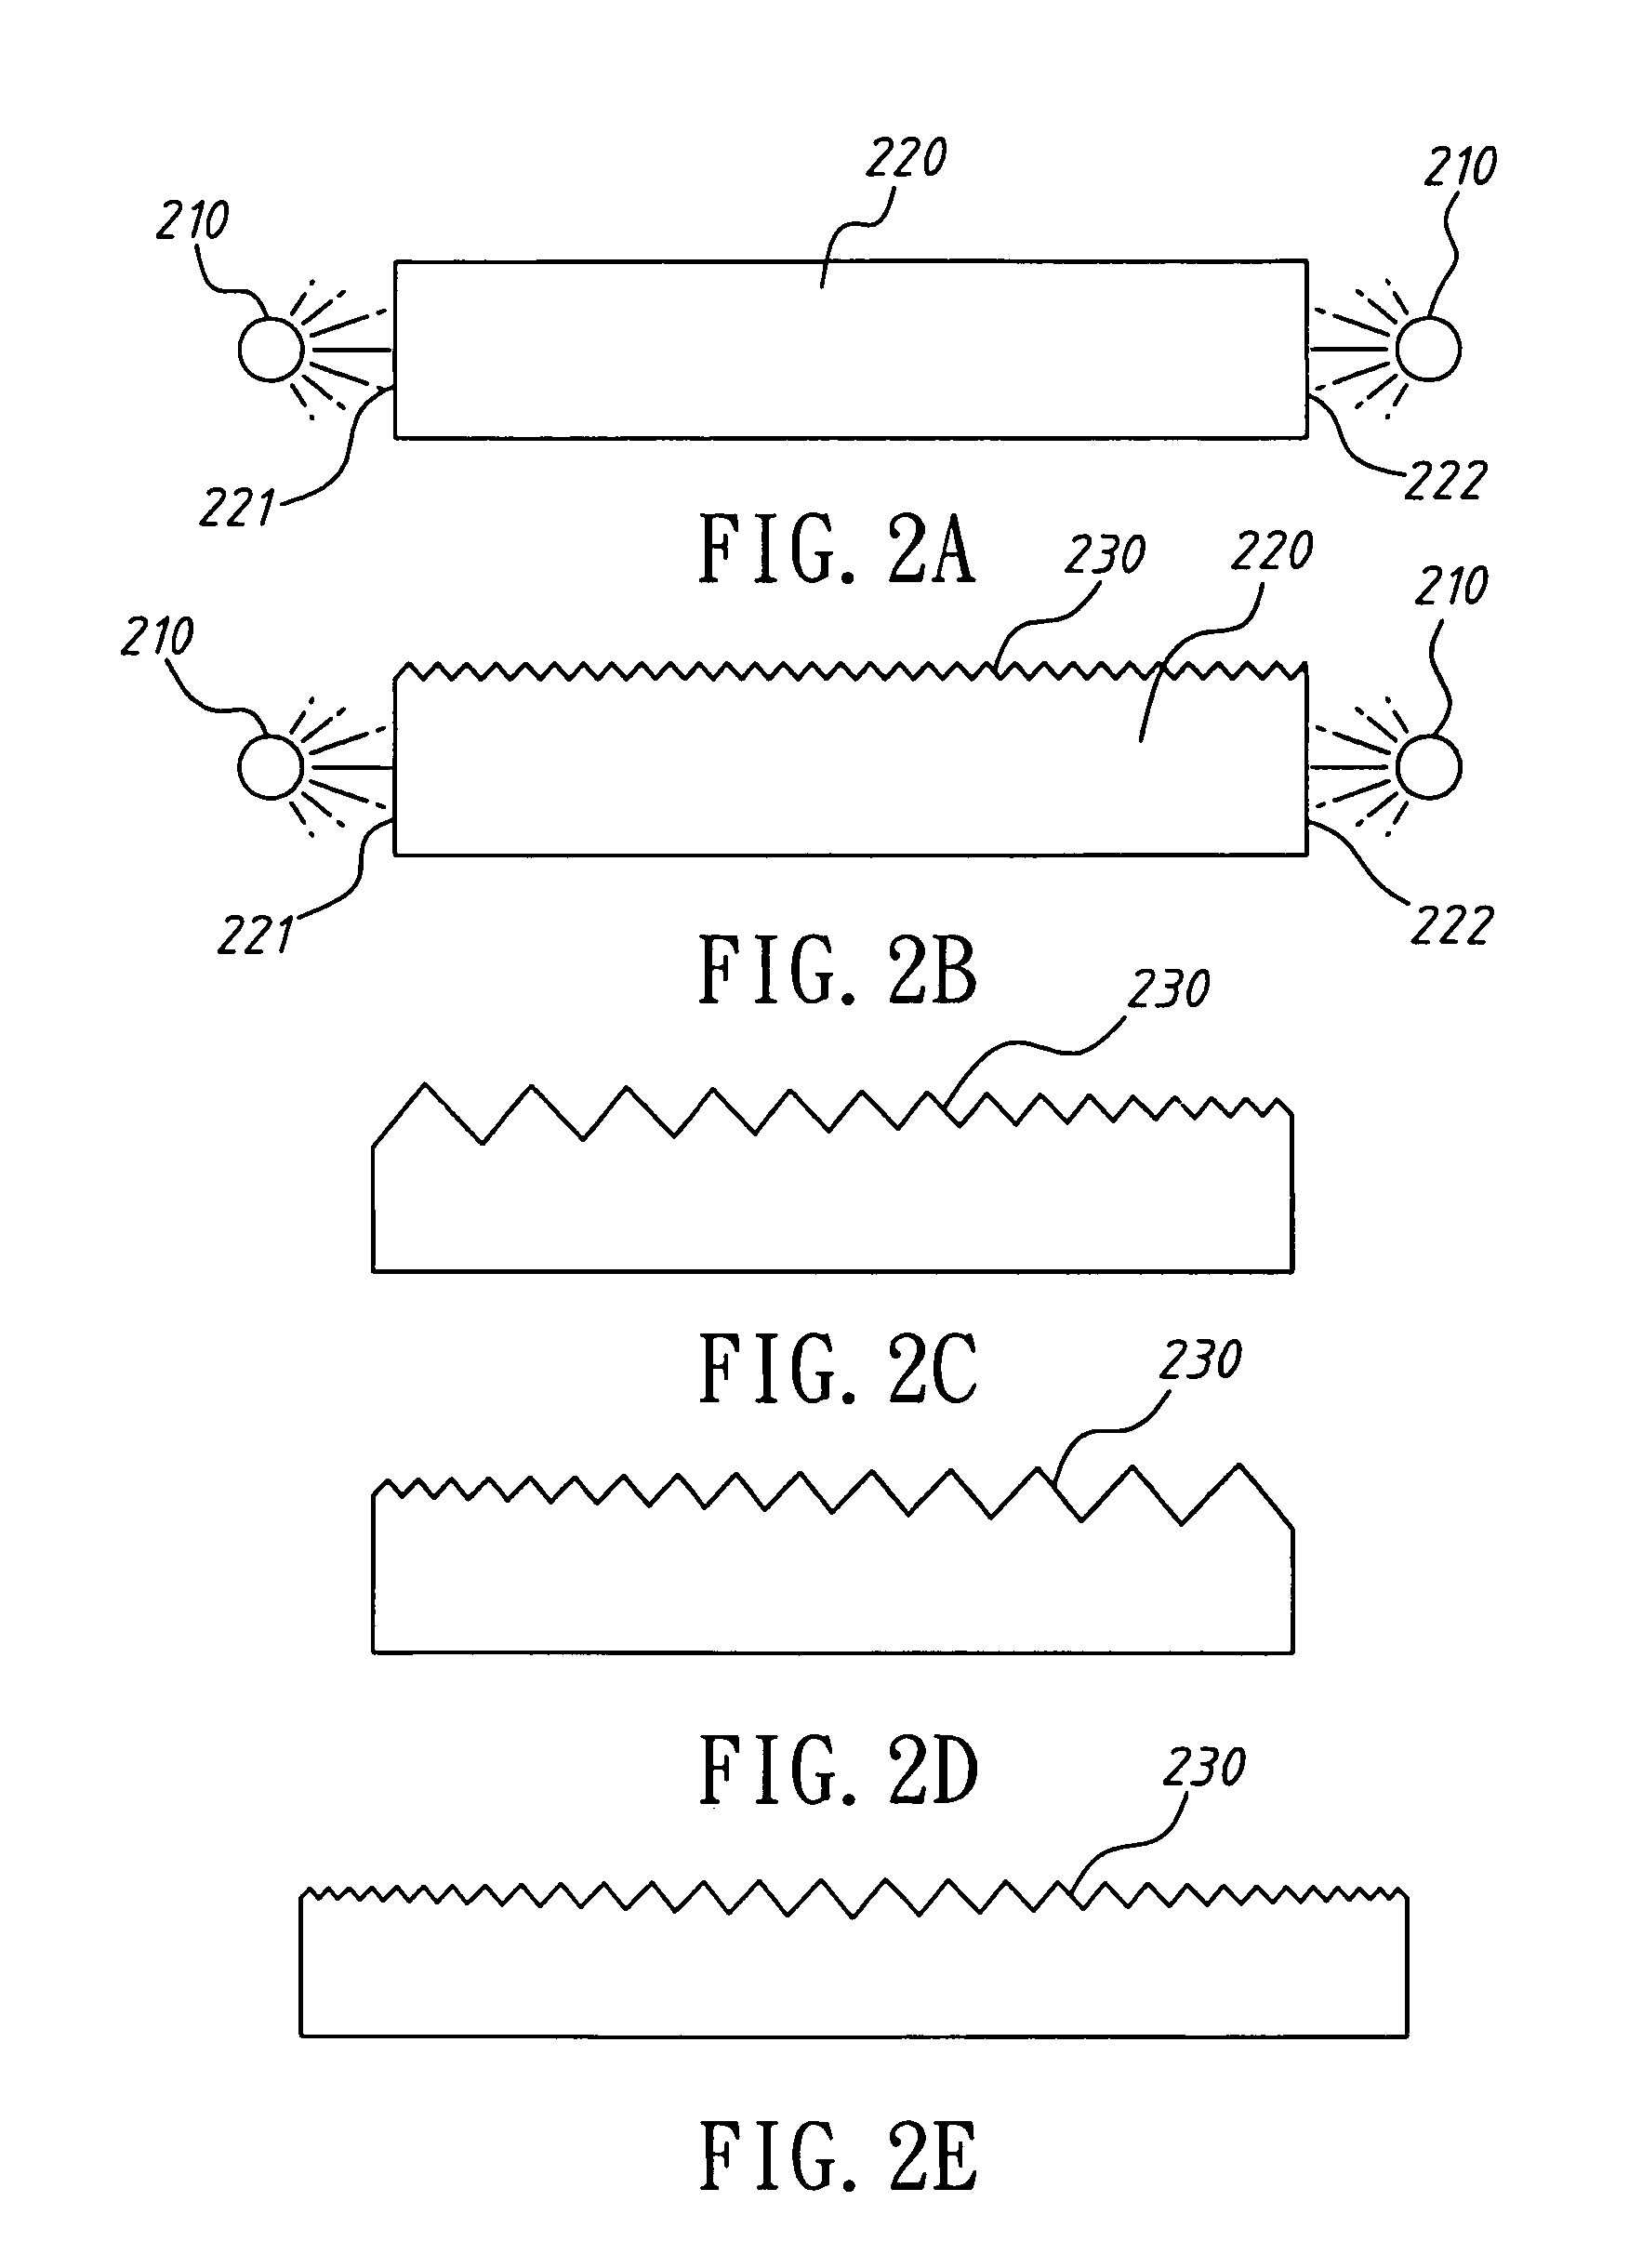 Light guide bar with patterned surface to enhance light uniformity and intensity